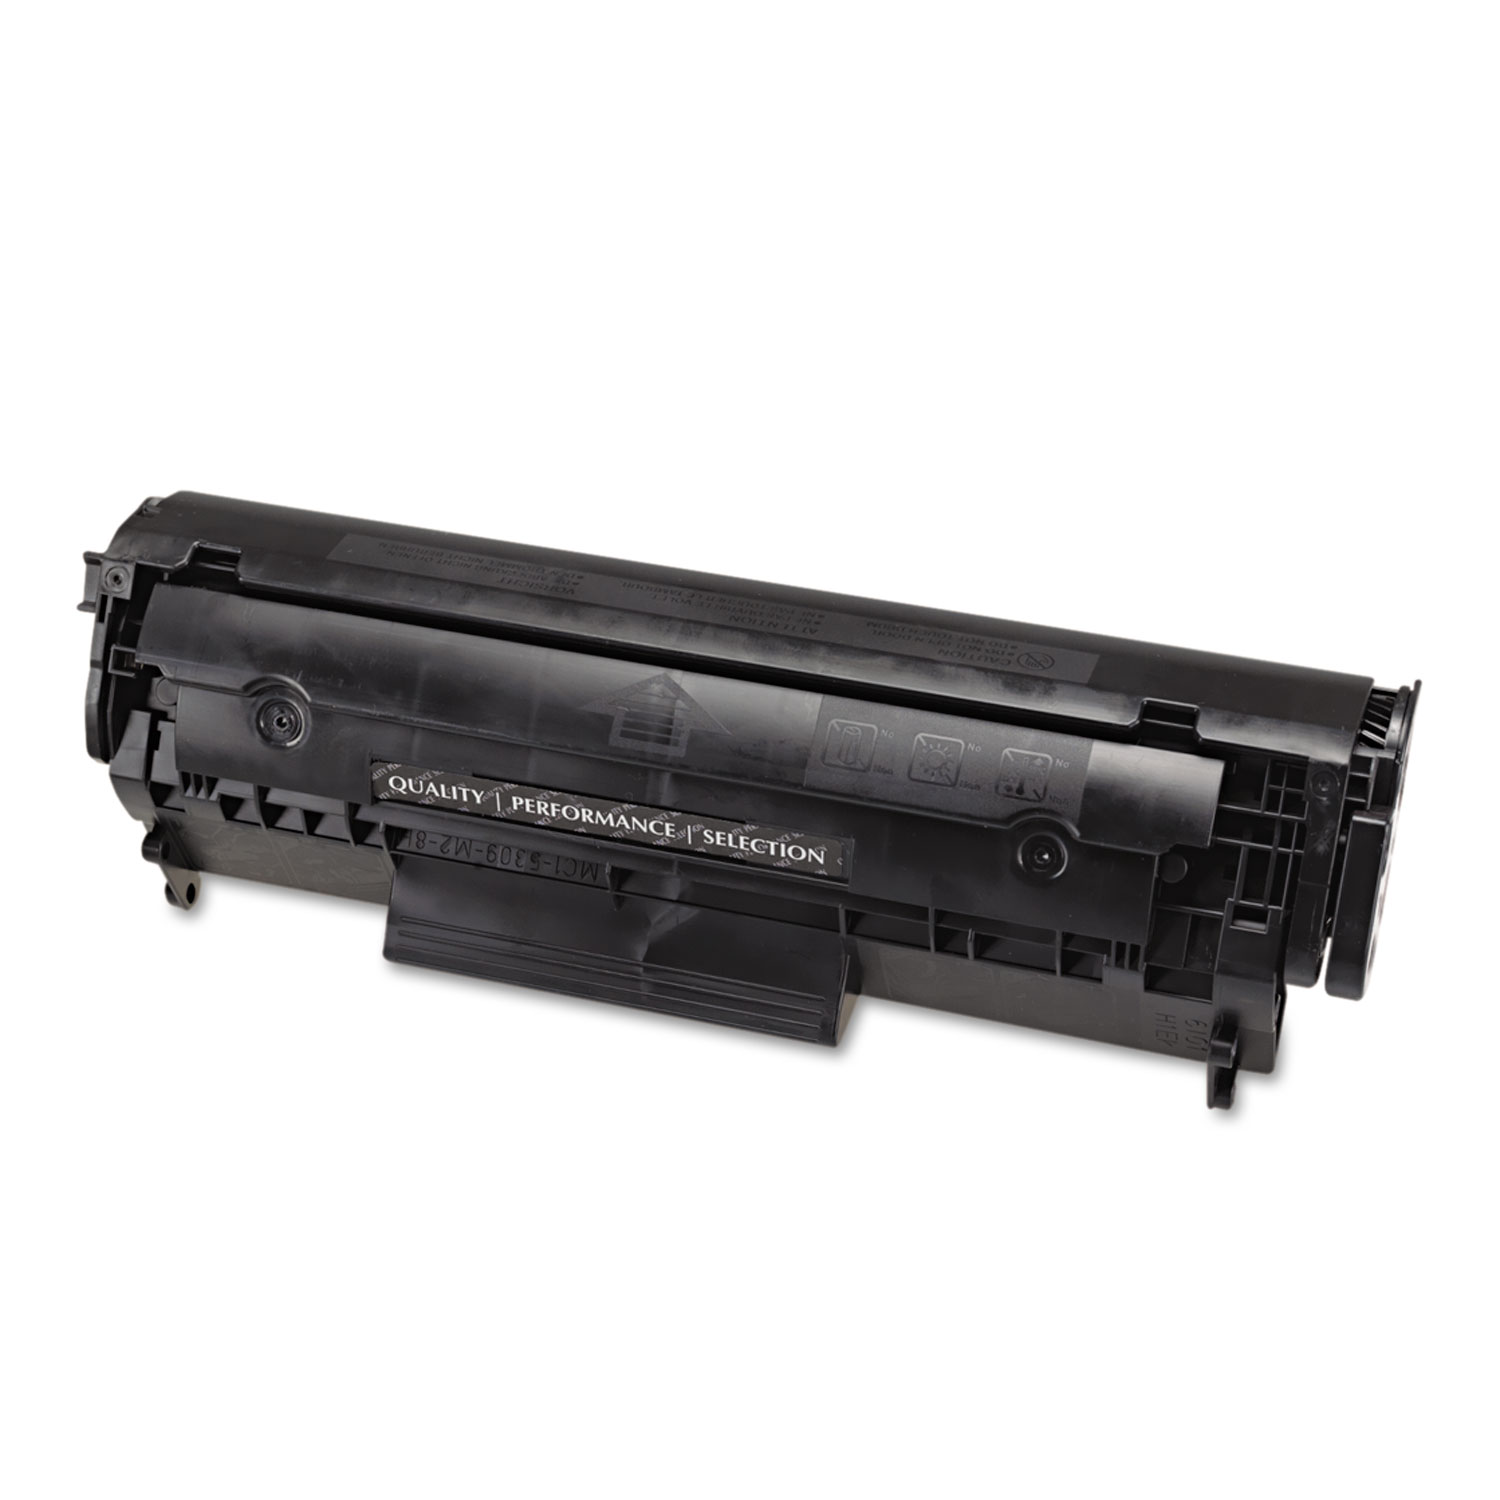 Remanufactured 0263B001AA (104) Toner, 2000 Page-Yield, Black